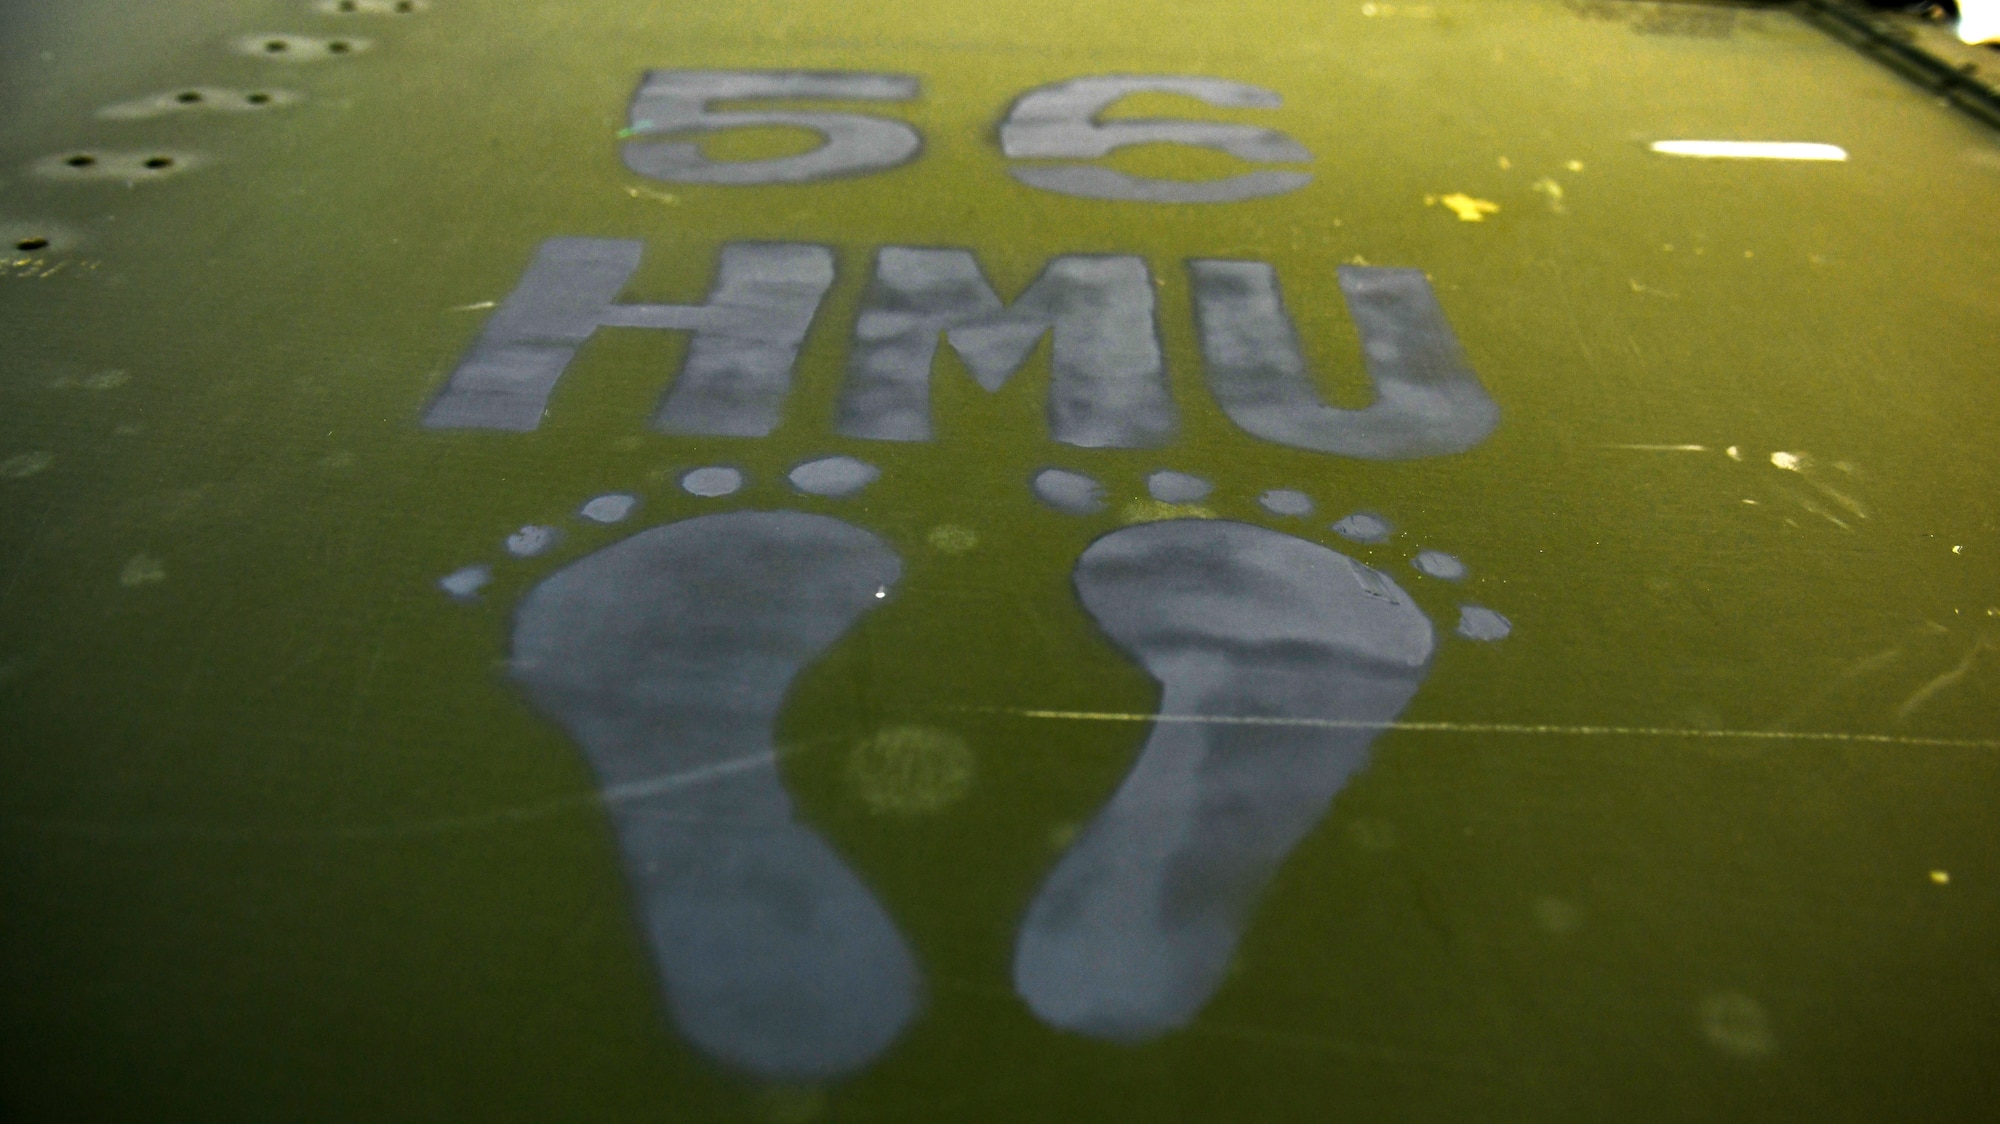 Jolly green foot prints represent the 56th Helicopter Maintenance Unit at Aviano Air Base, Italy, July 14, 2020. The 56th HMU renovated various section in hangar three. (U.S. Air Force photo by Airman 1st Class Ericka A. Woolever)